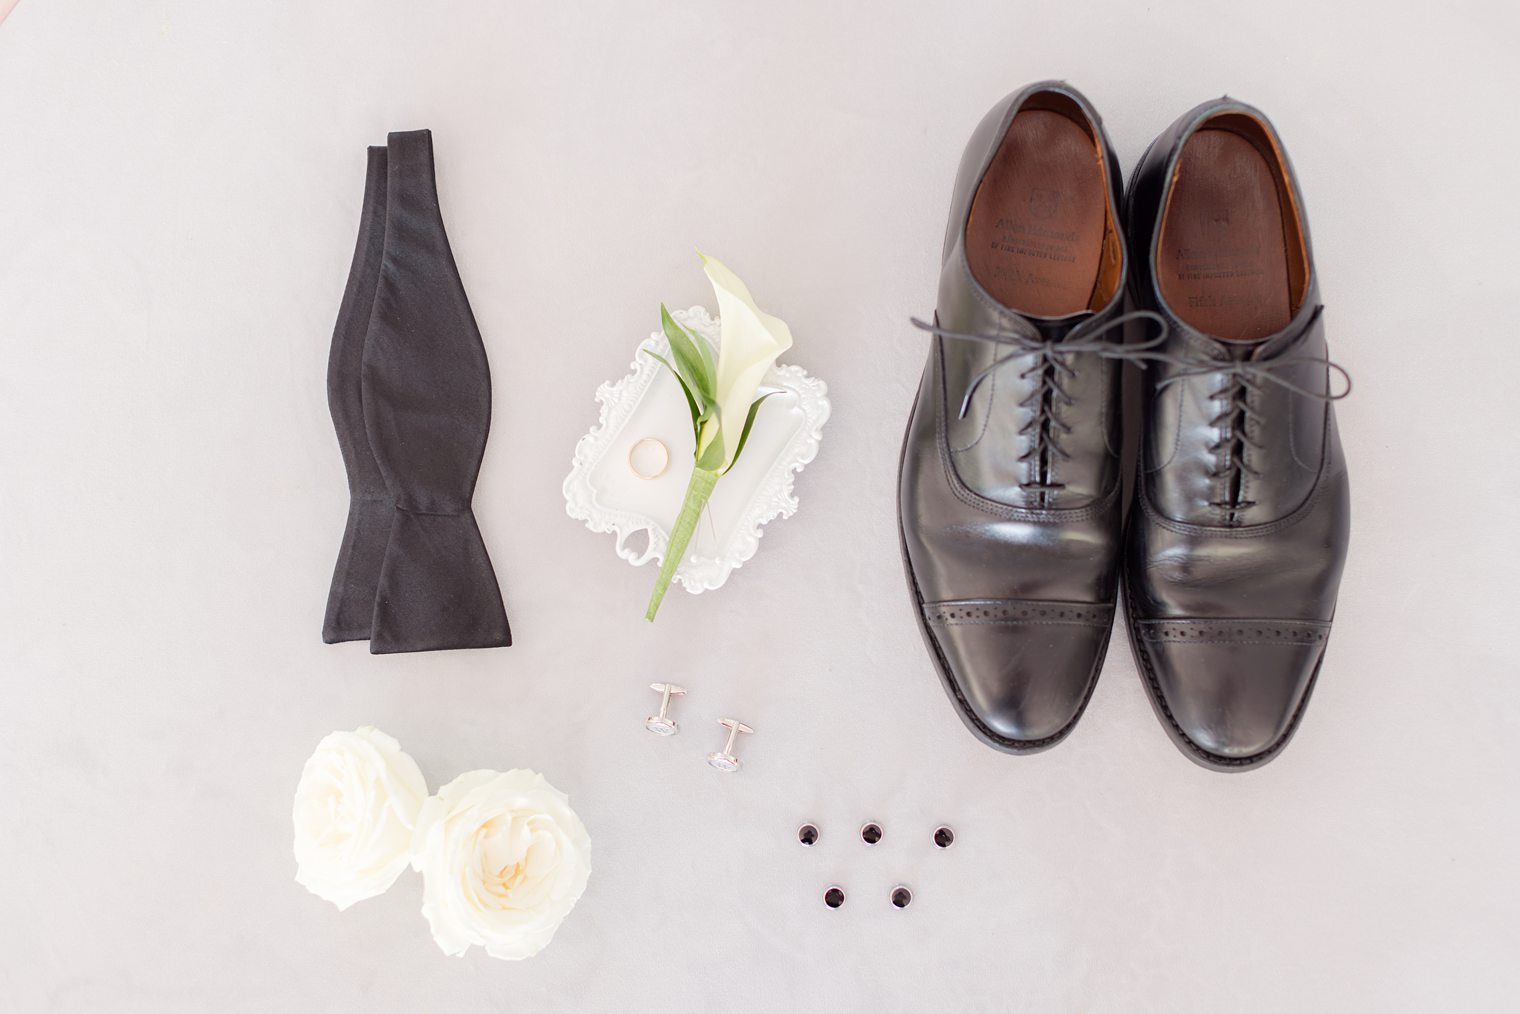 Essentials for the groom